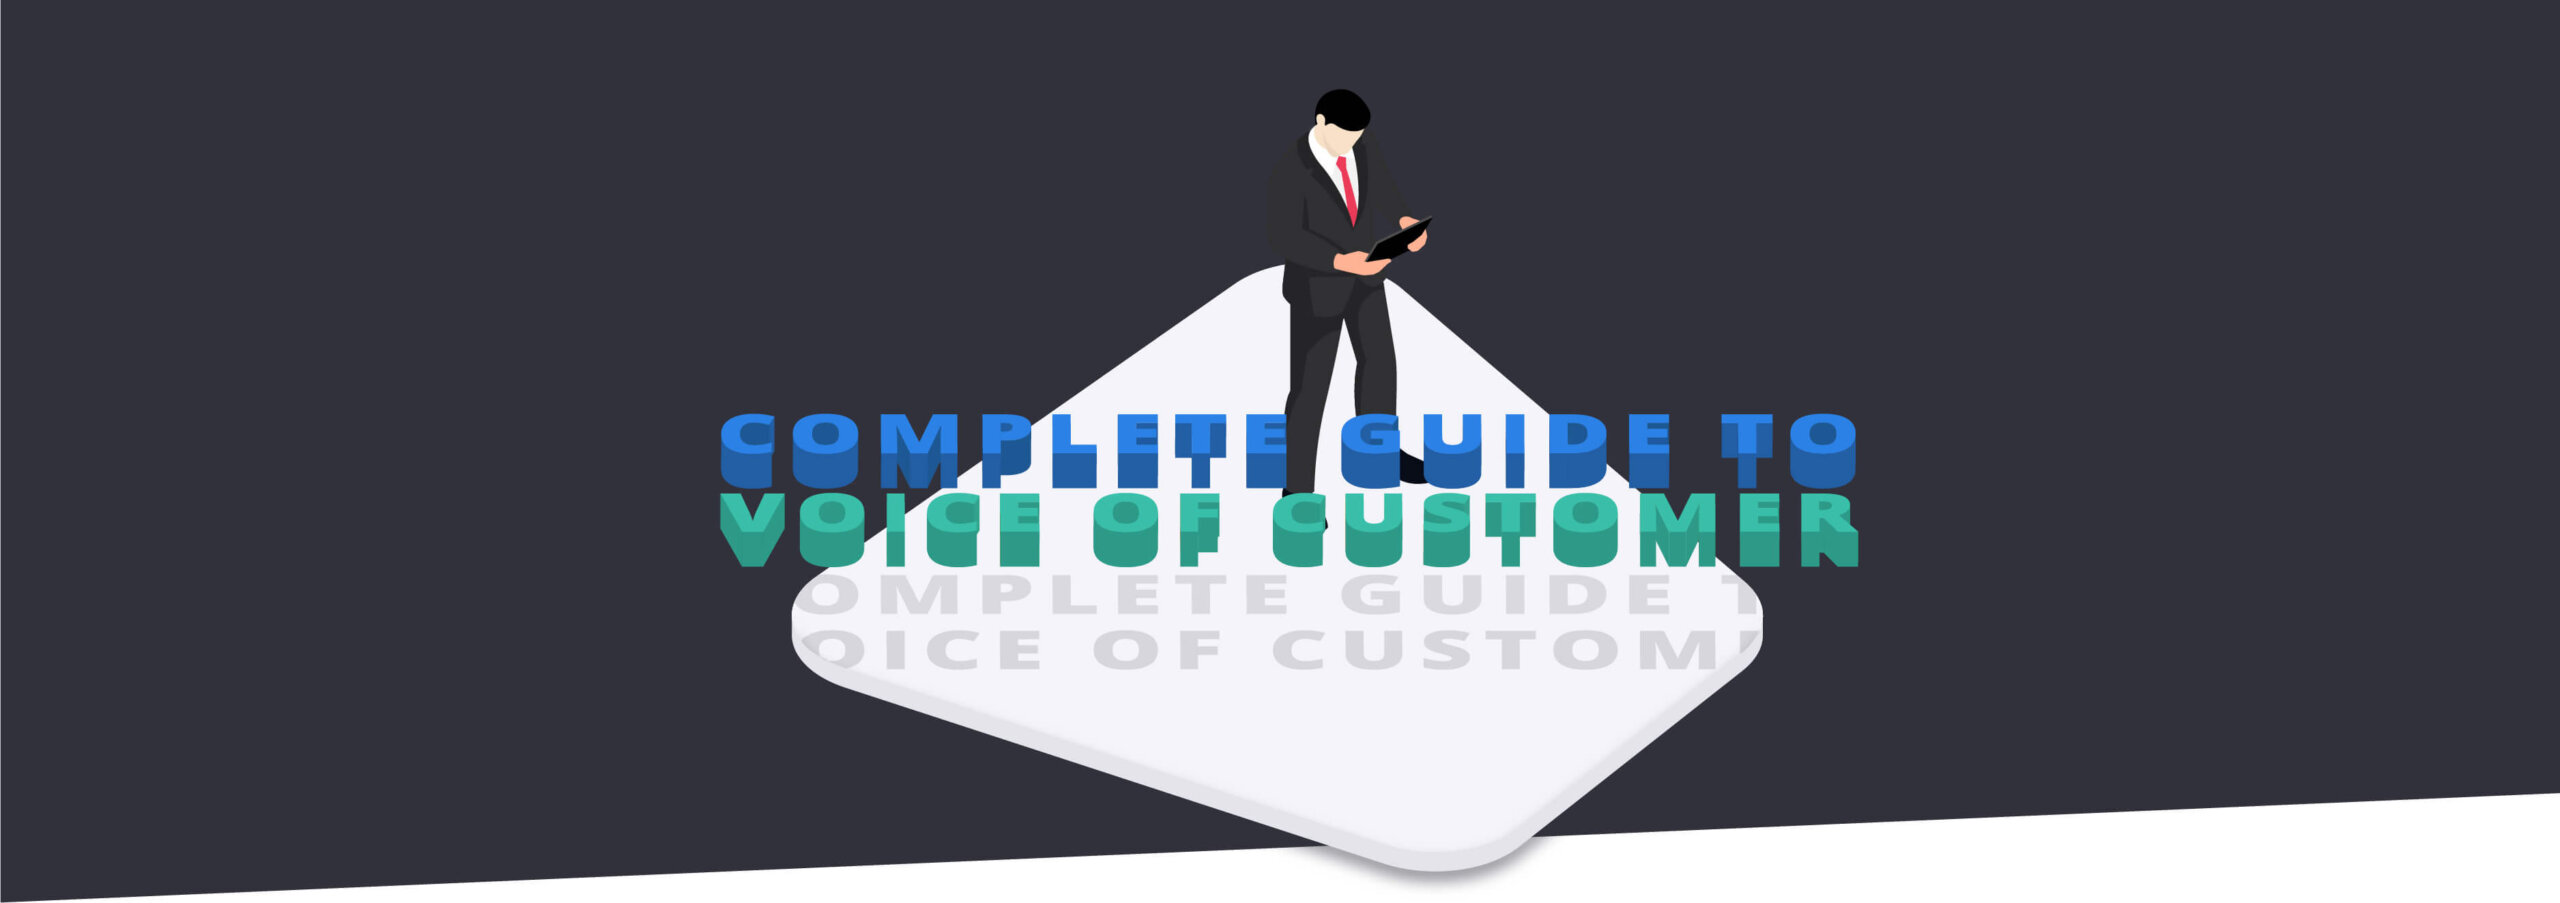 The Ultimate Guide to the Voice of Customer (VoC)